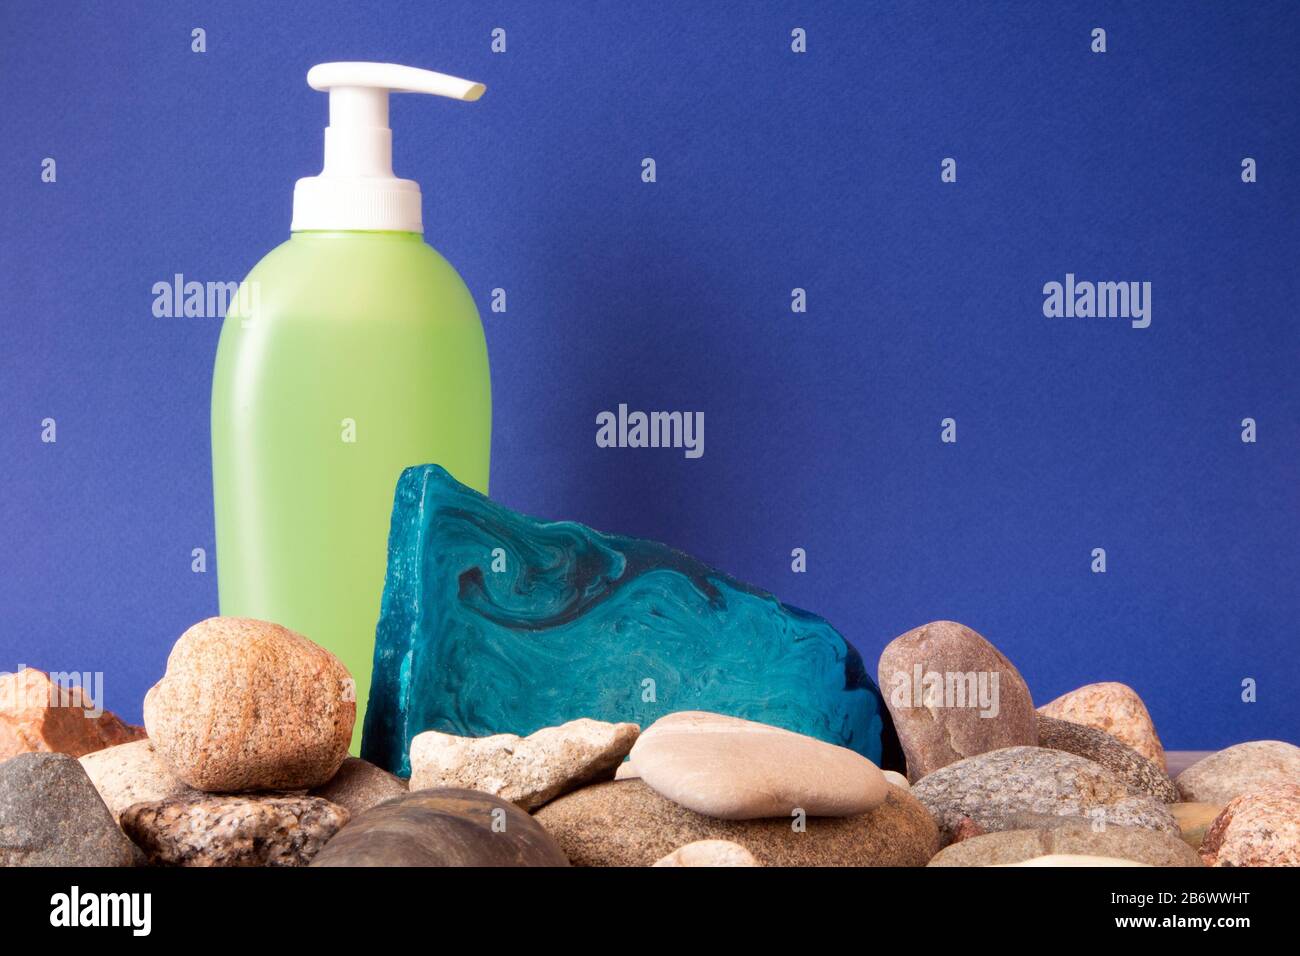 Thin flat piece of blue mint handmade soap lying on pebble and toiletry behind Stock Photo